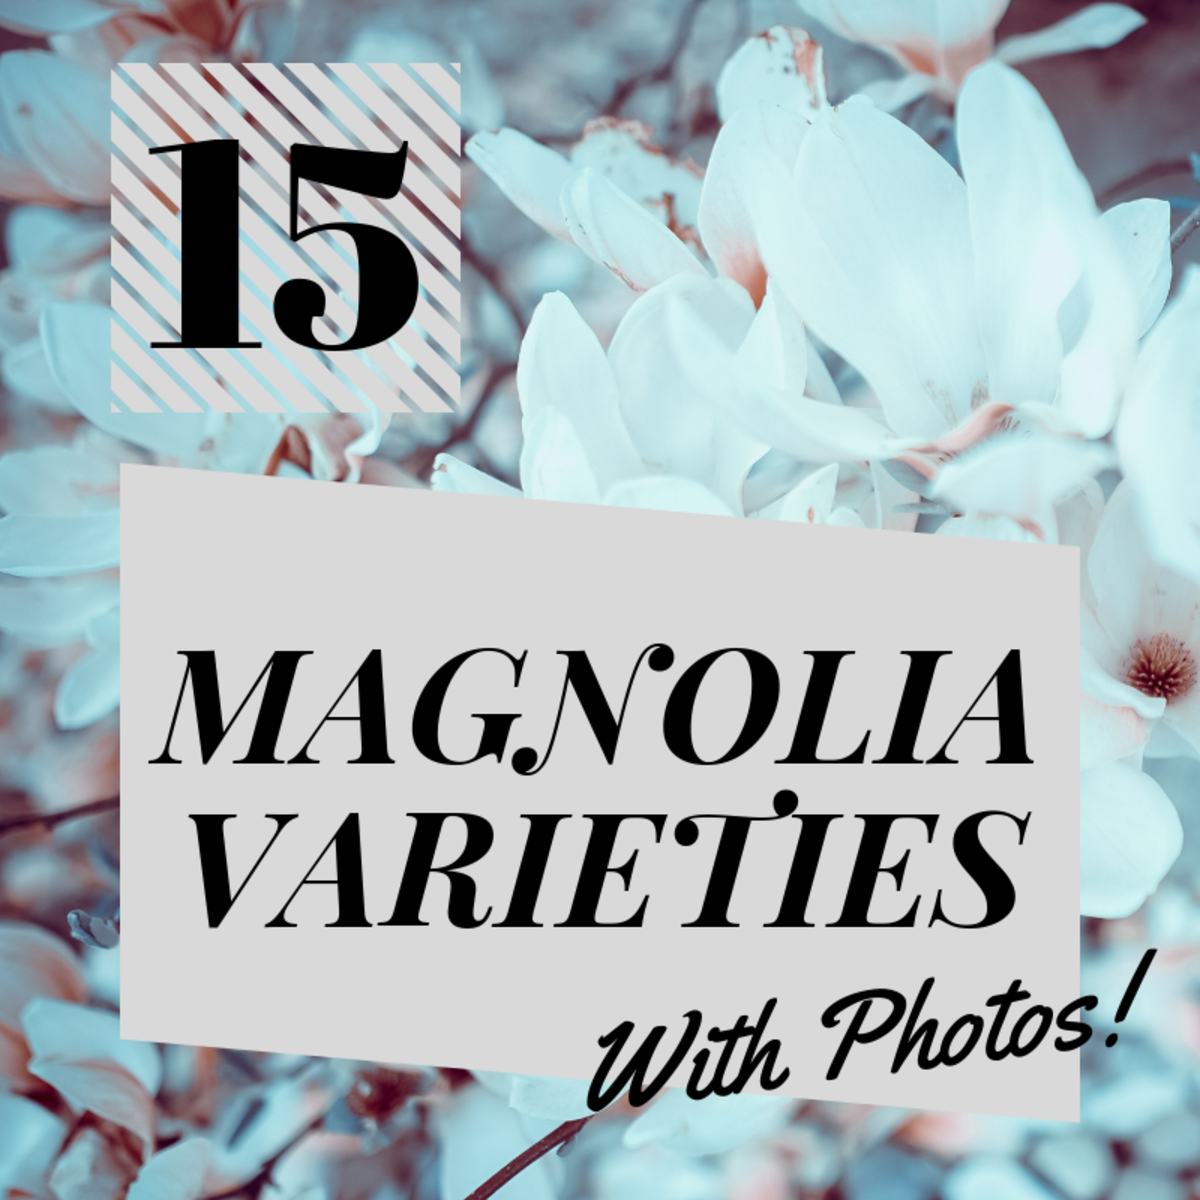 15 Types of Magnolia Trees and Shrubs (With Photos)